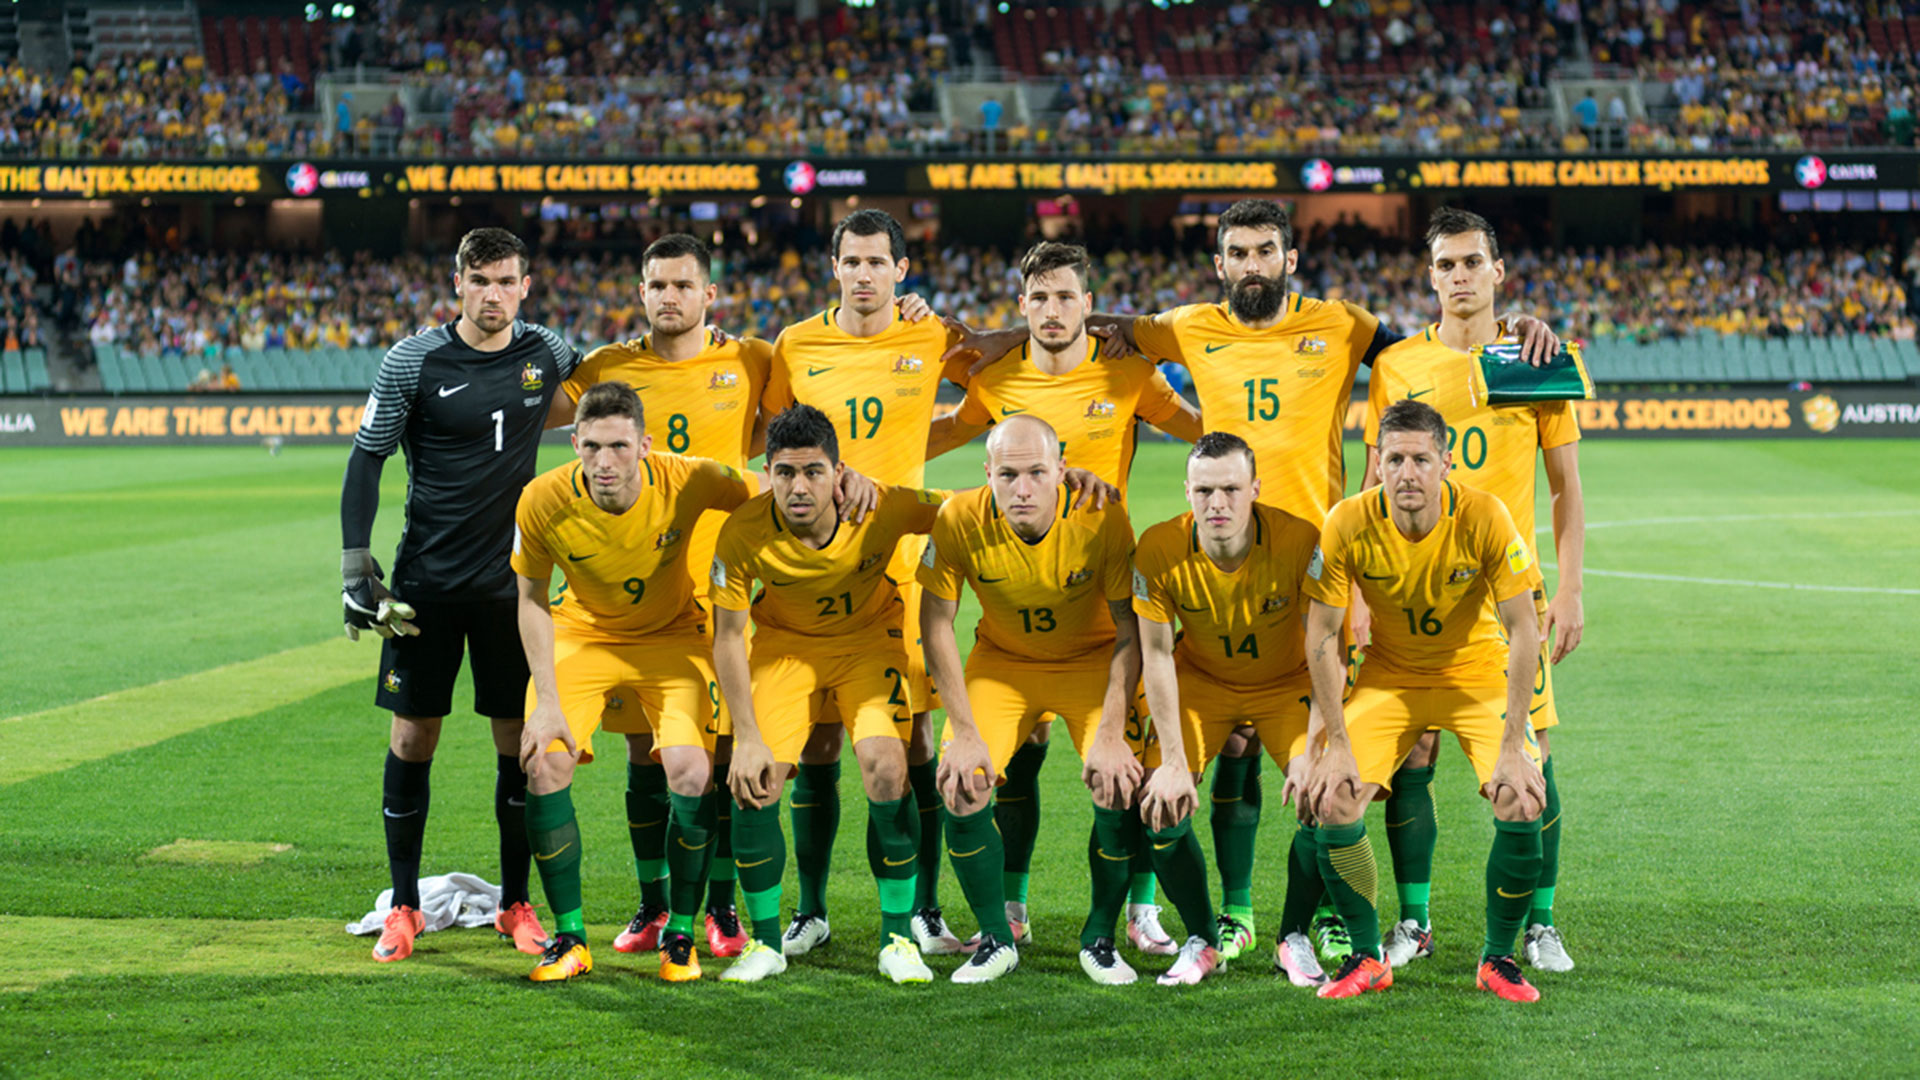 Socceroos at Adelaide Oval